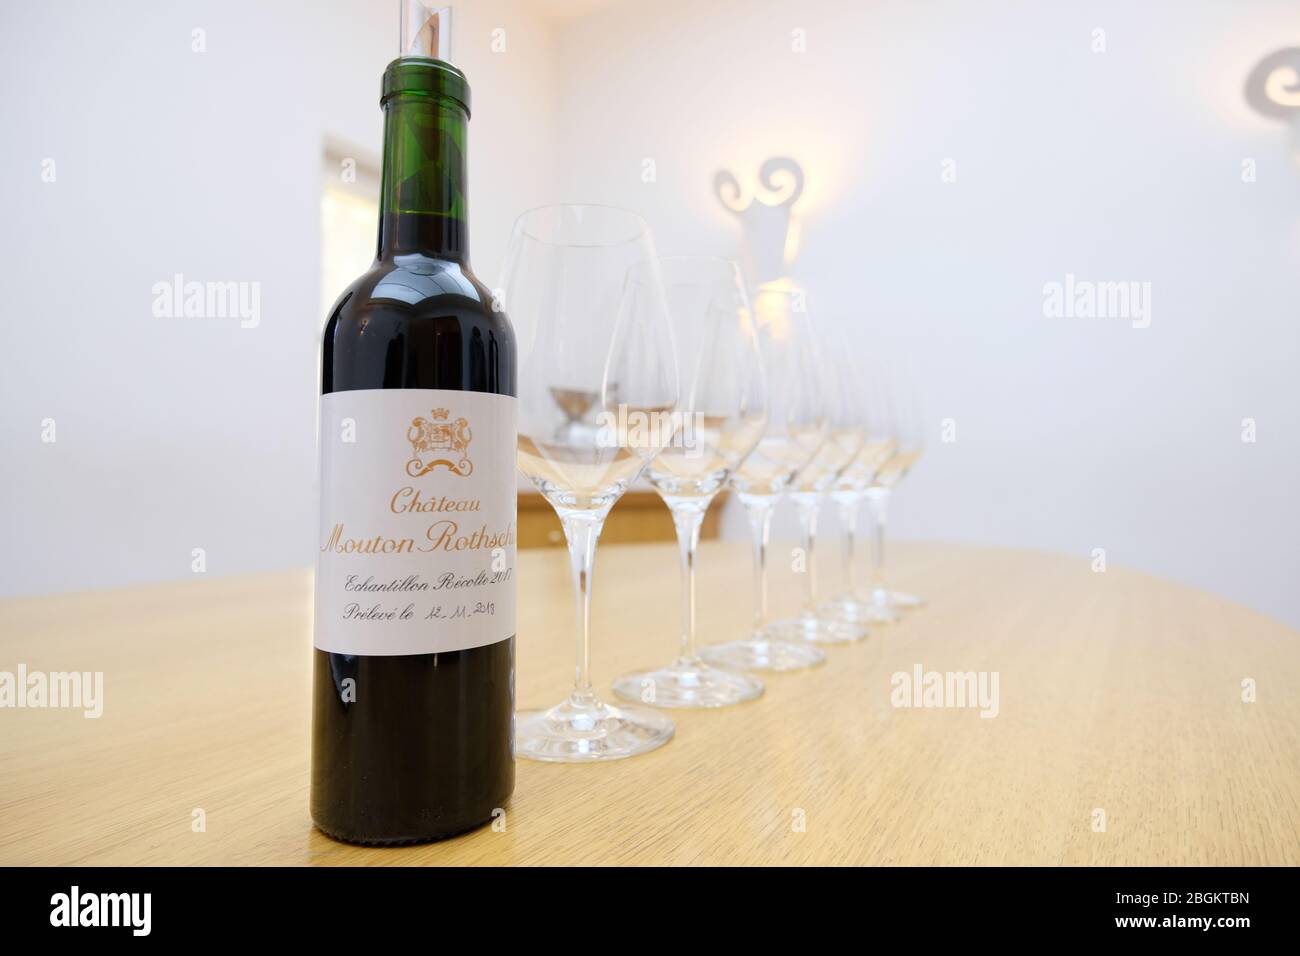 --FILE--A bottle of wine produced by Ch teau Mouton Rothschild, a wine estate listed among the only five Premiers Crus in France and renowned for its Stock Photo